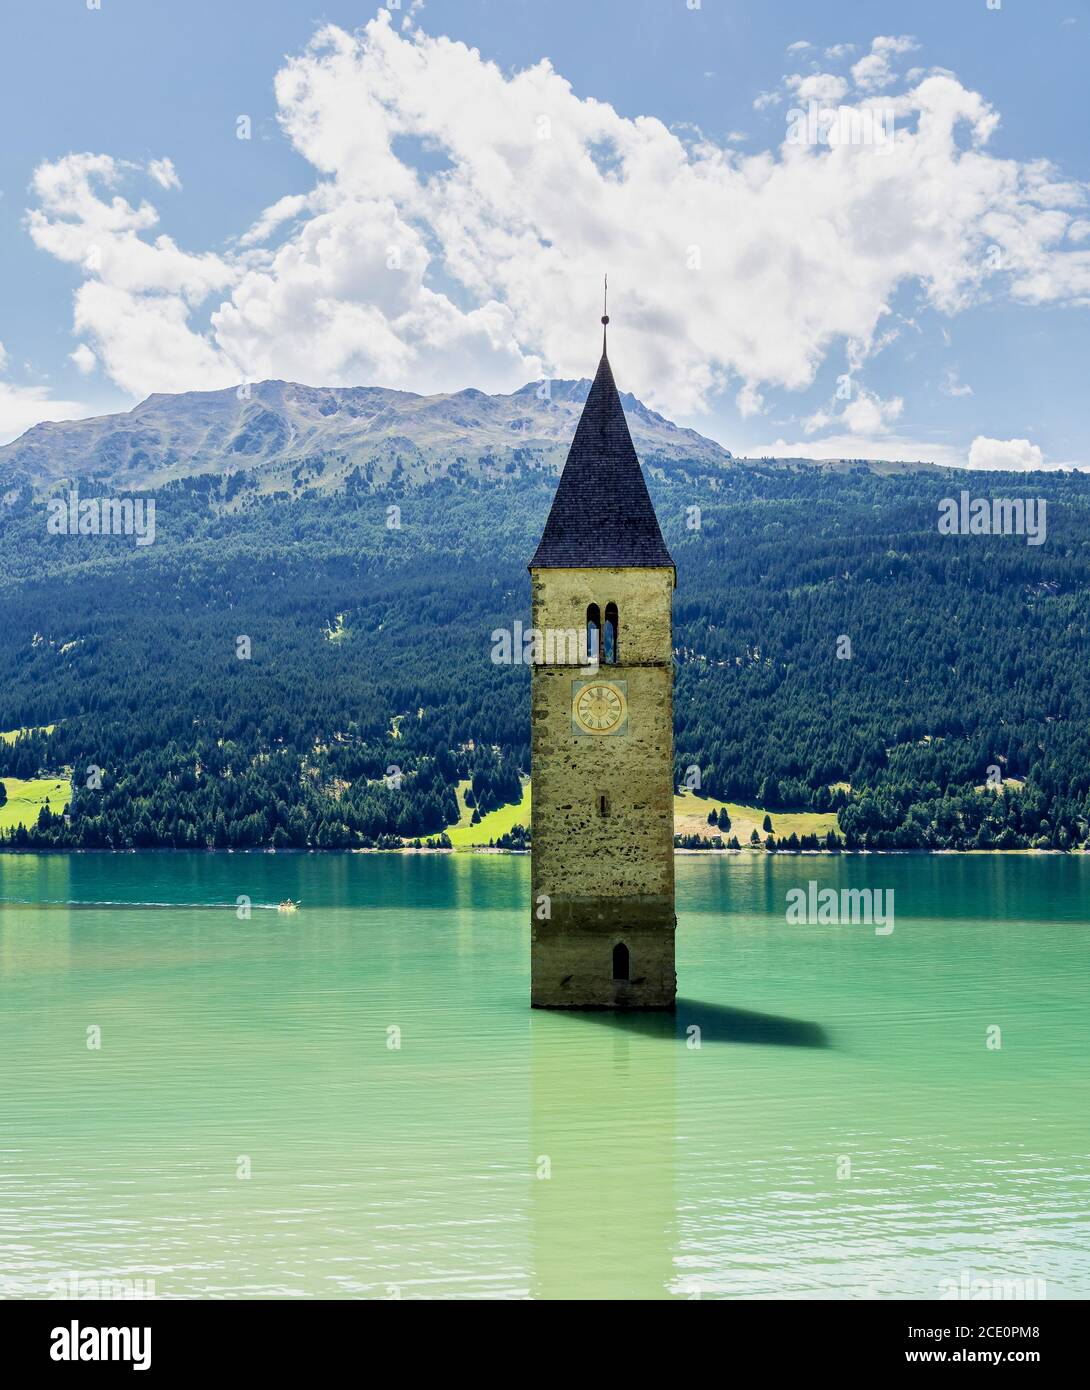 The famous bell tower in the Lake of Reschen - Lago di Resia in South Tyrol, Italy. During WW2 a dam was build and put the village under water, only t Stock Photo